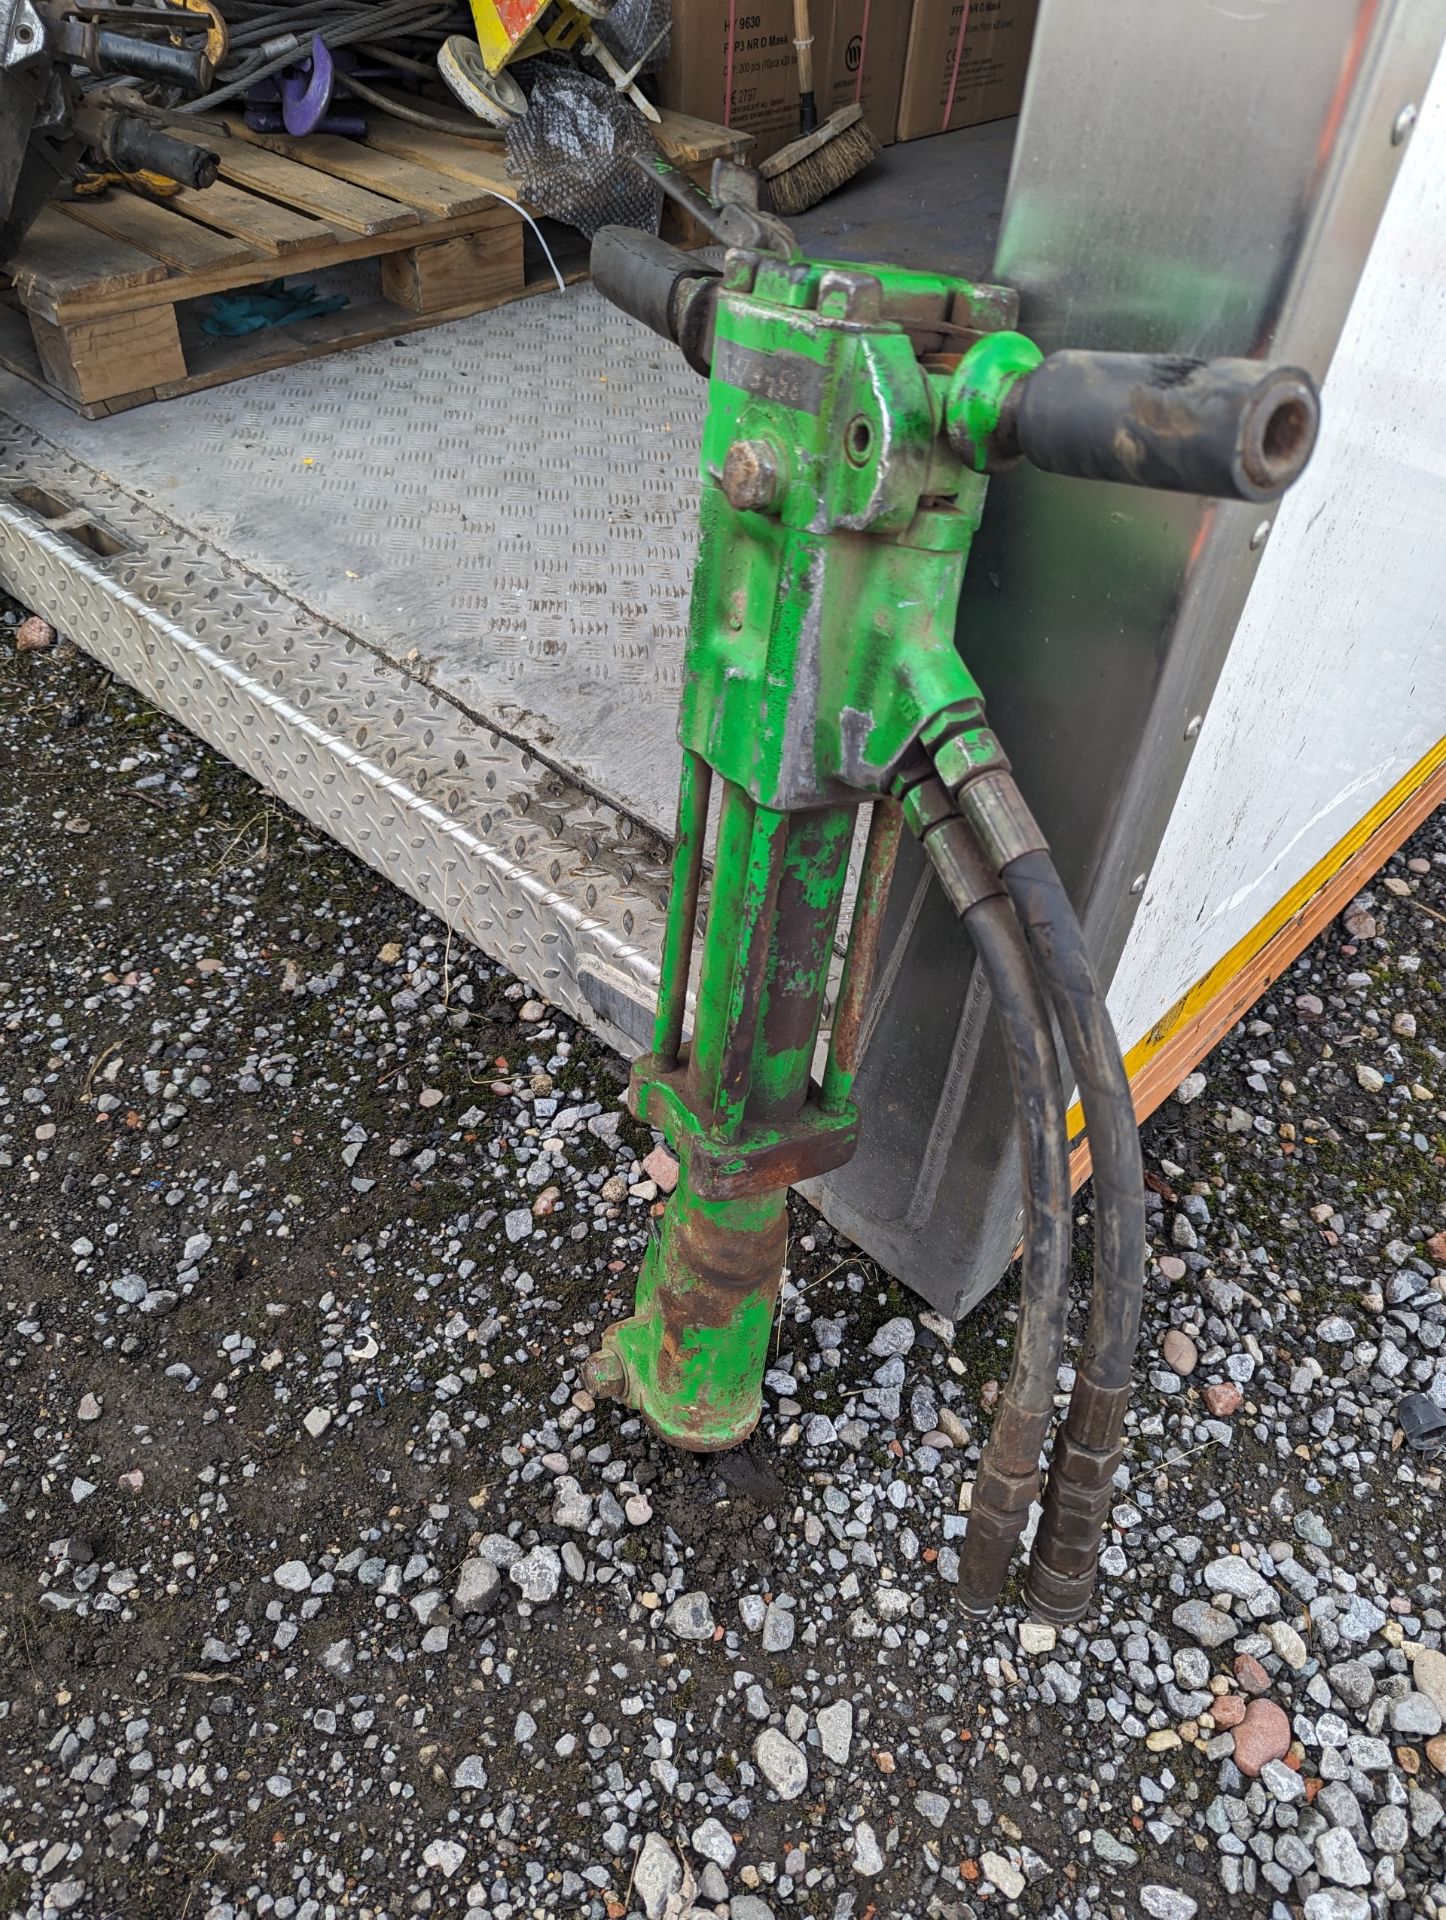 1 Telex hydraulic breaker, used, in good condition - Image 2 of 5